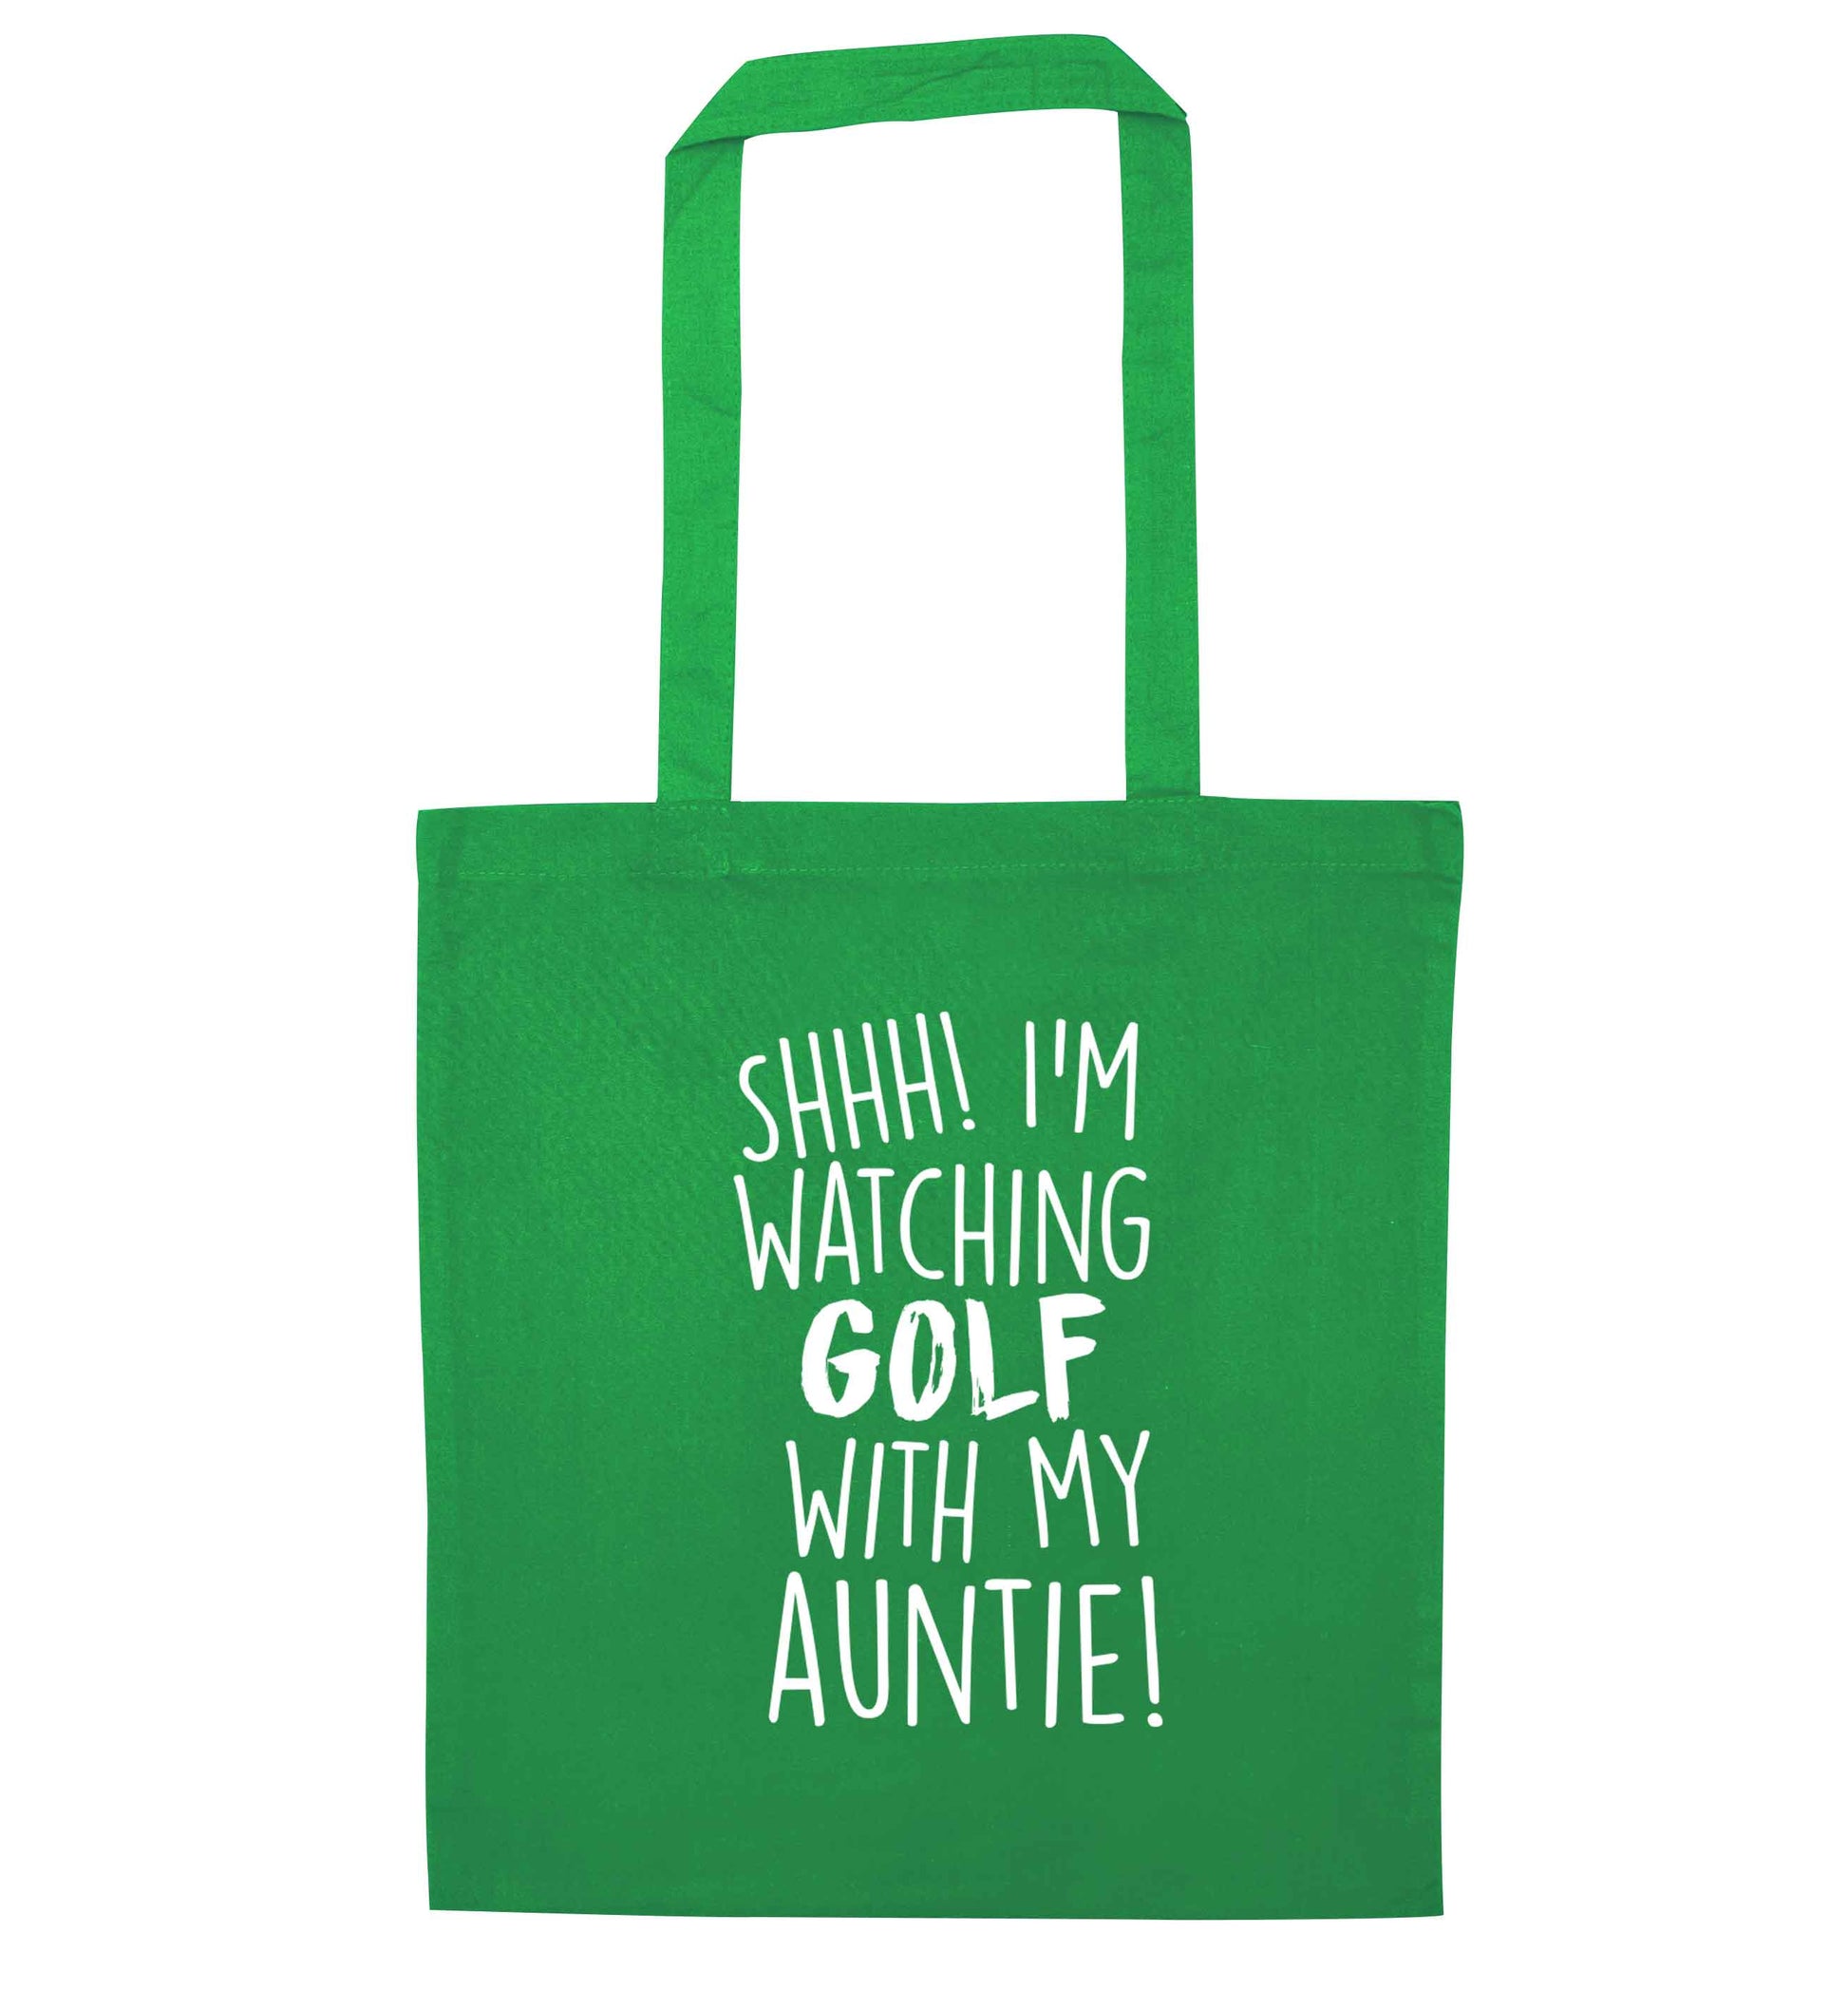 Shh I'm watching golf with my auntie green tote bag